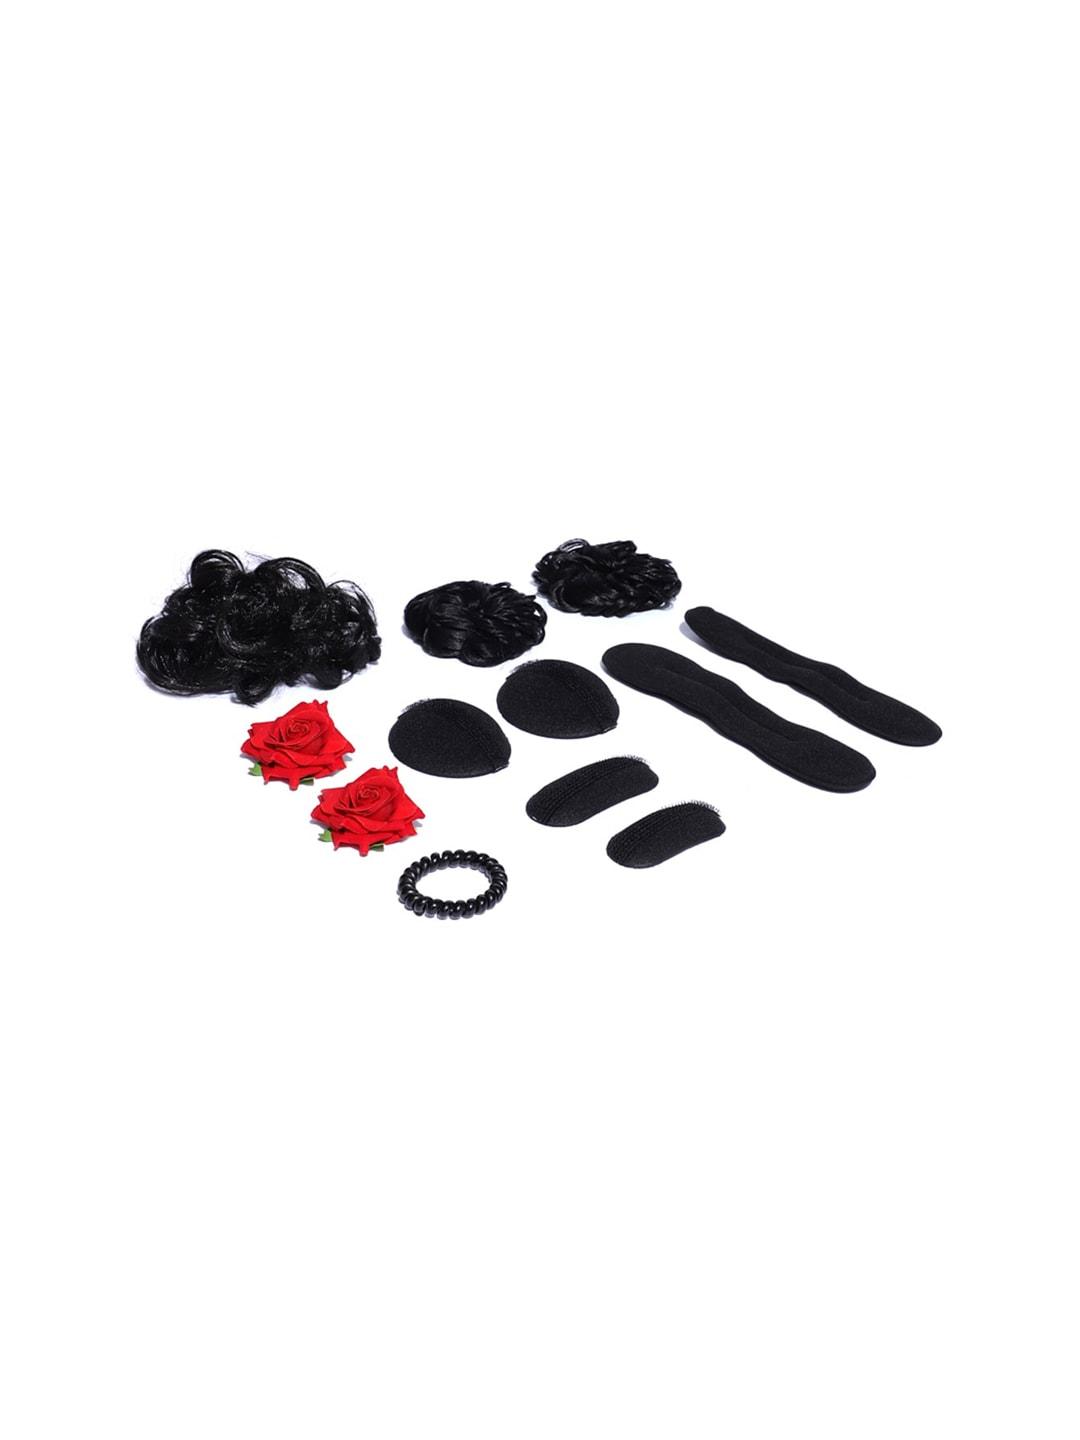 CHRONEX Set Of 12 Hair Accessories With Free Hair Juda For Party & Festives